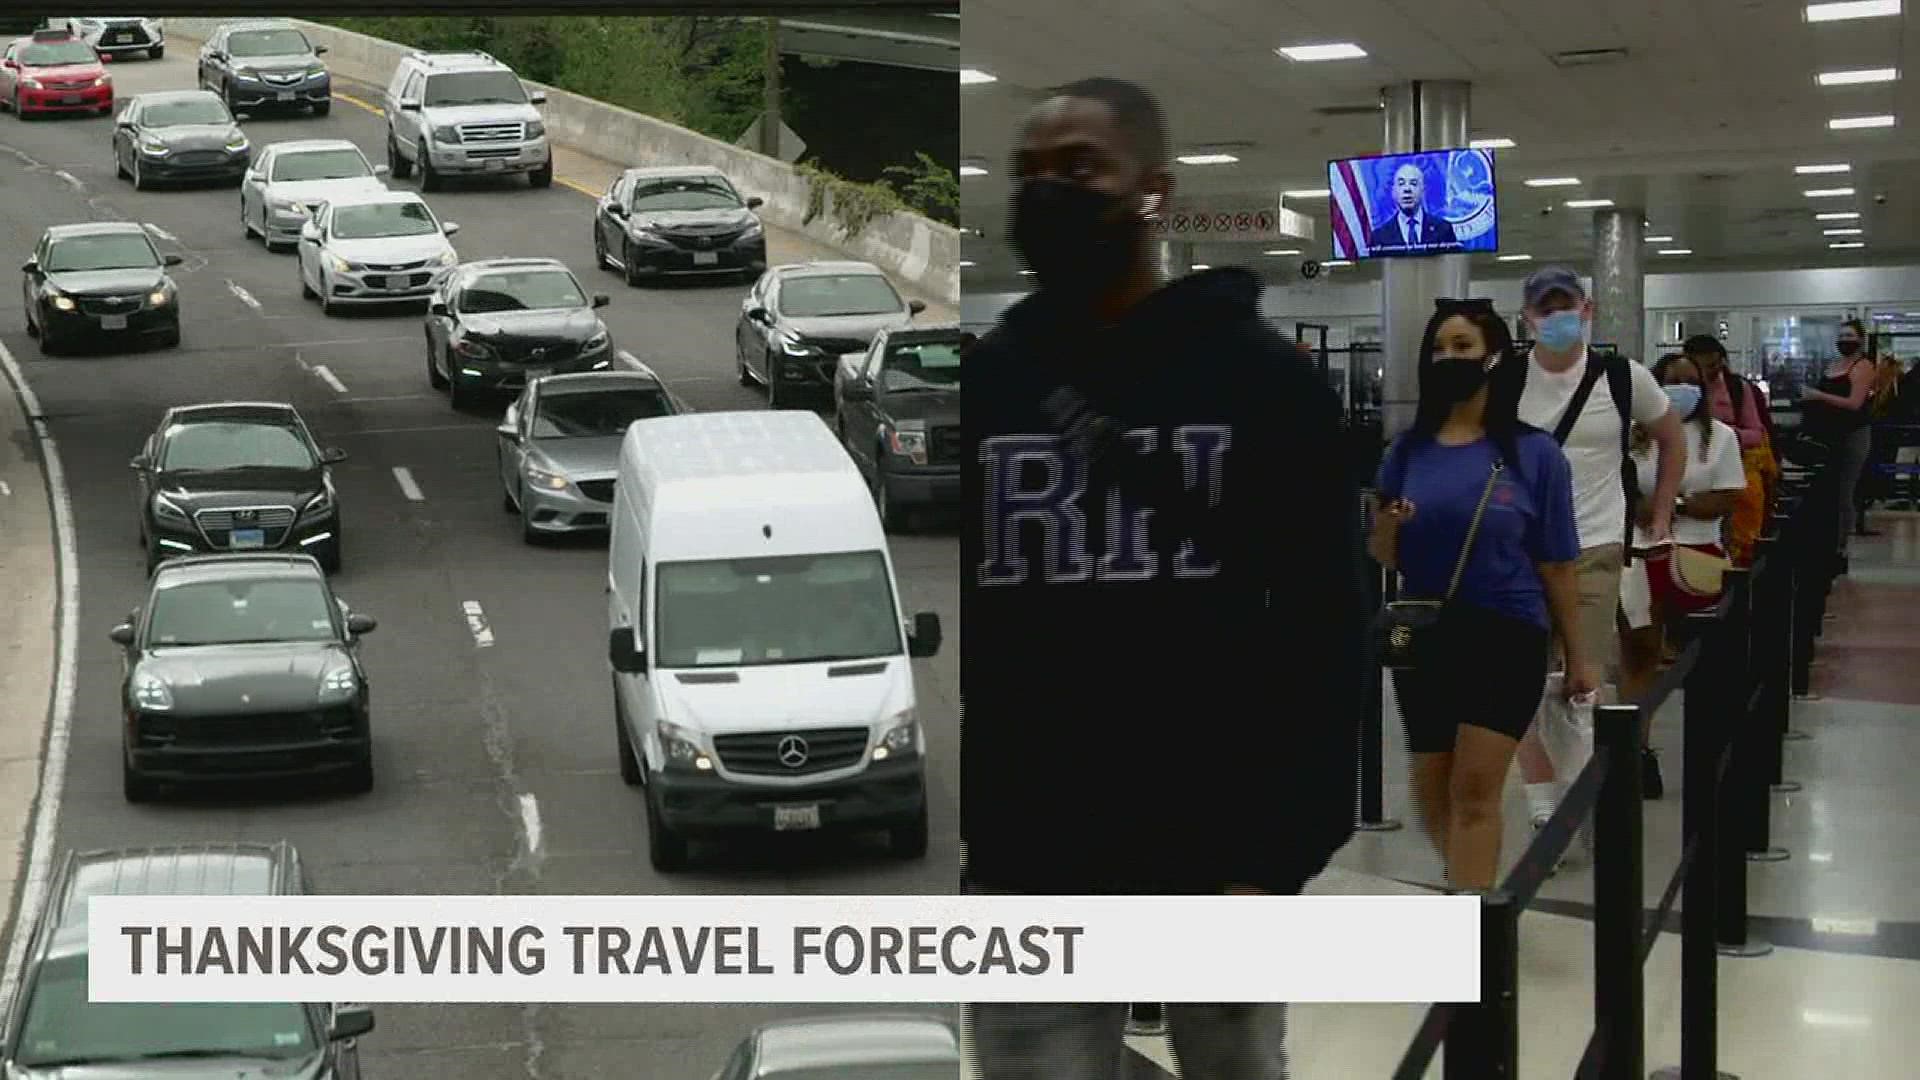 Transportation officials are warning the public to be early and prepared when traveling this season, and to expect fewer open seats on their flights.